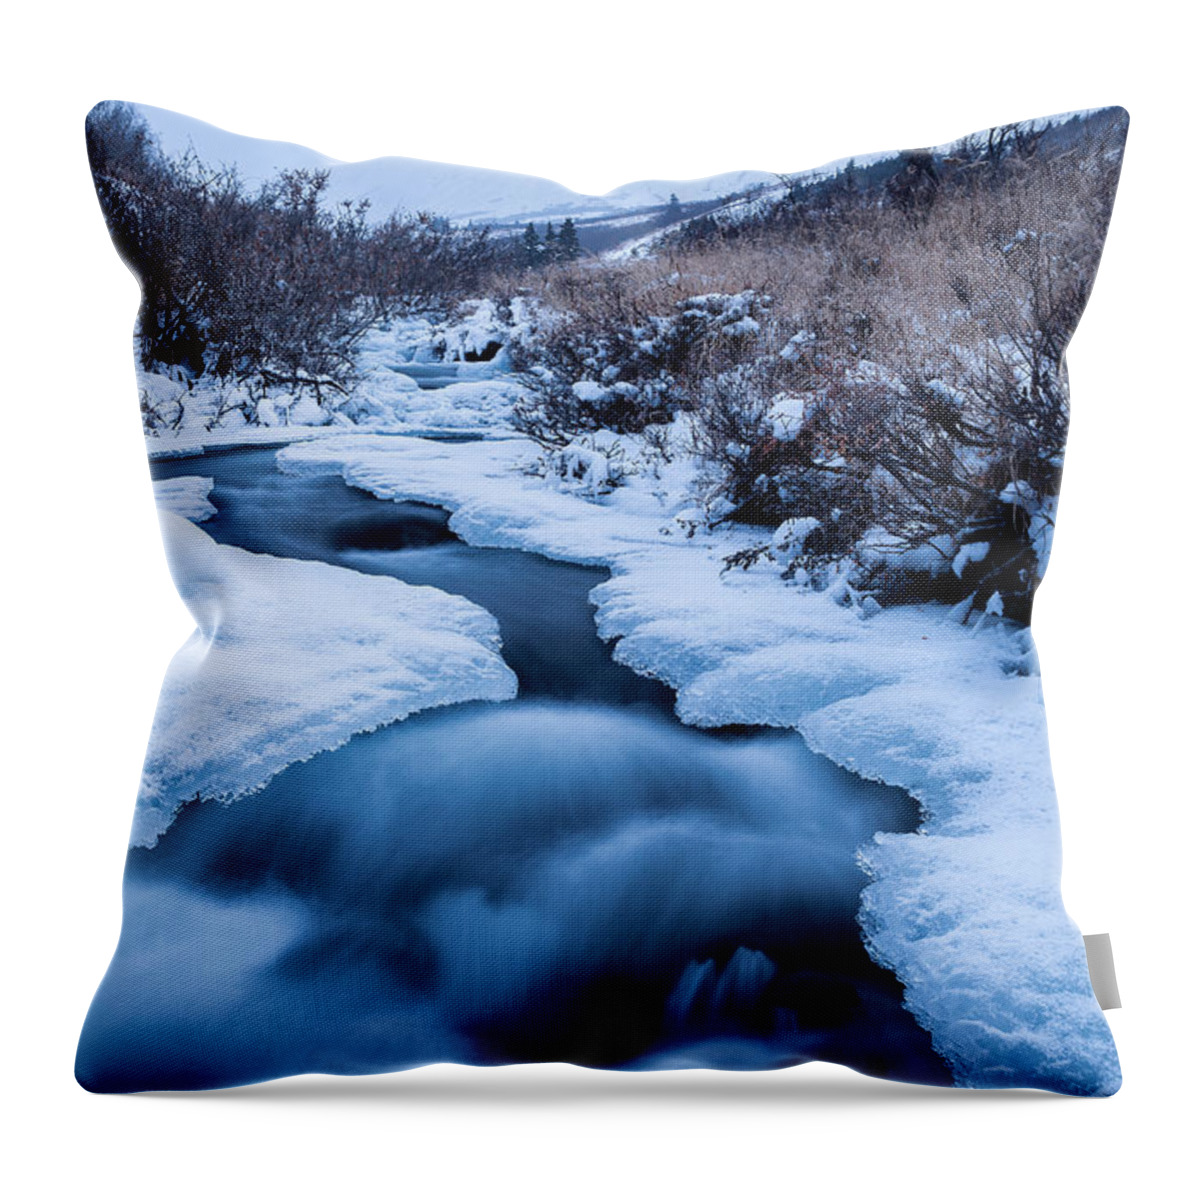 Alaska Throw Pillow featuring the photograph Freezing Over by Tim Newton